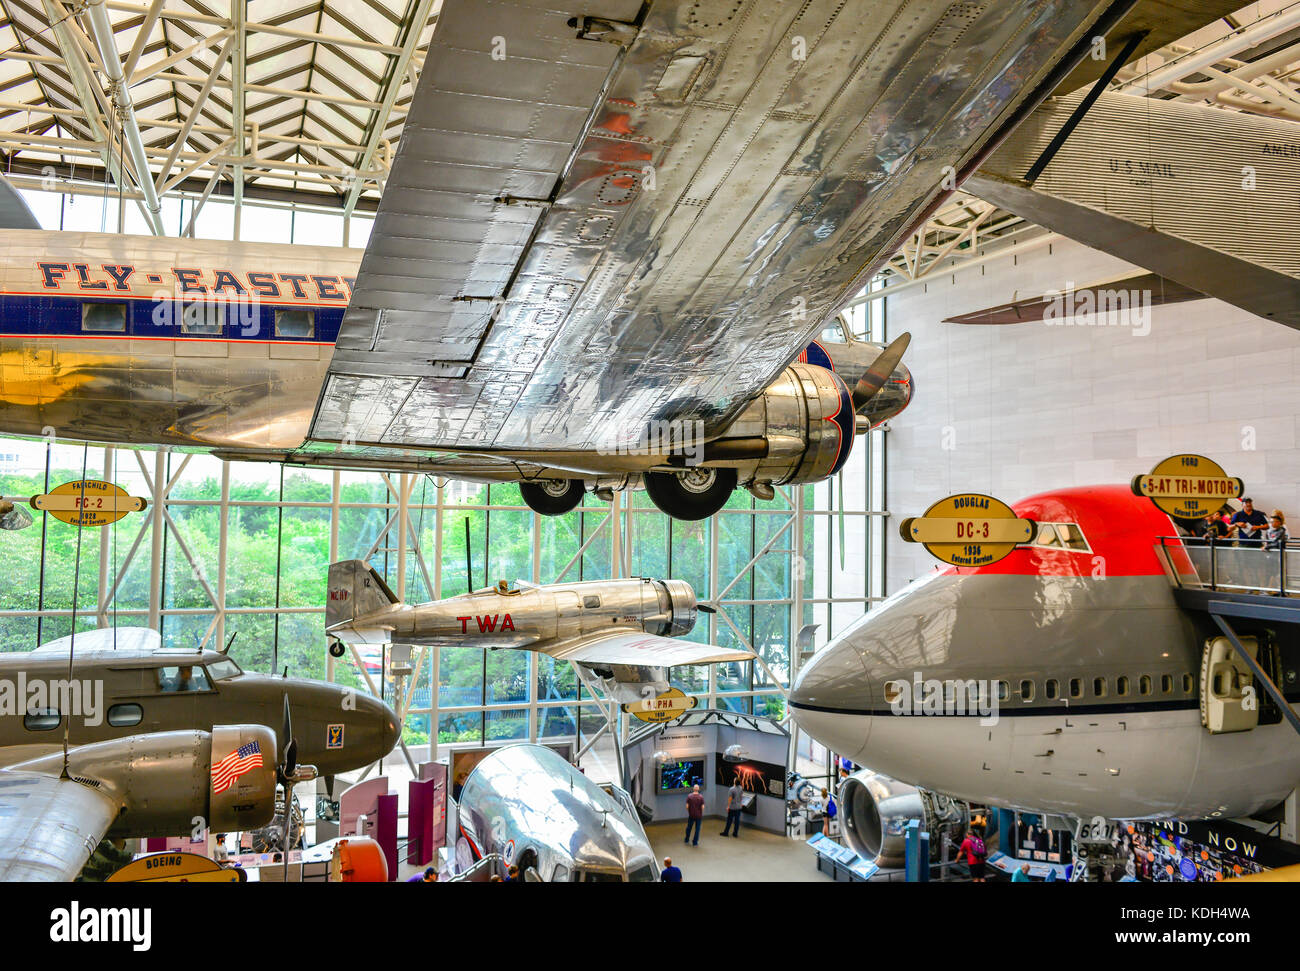 An assortment of vintage American airplanes on display at the National Air and Space Museum, Washington, DC, USA Stock Photo